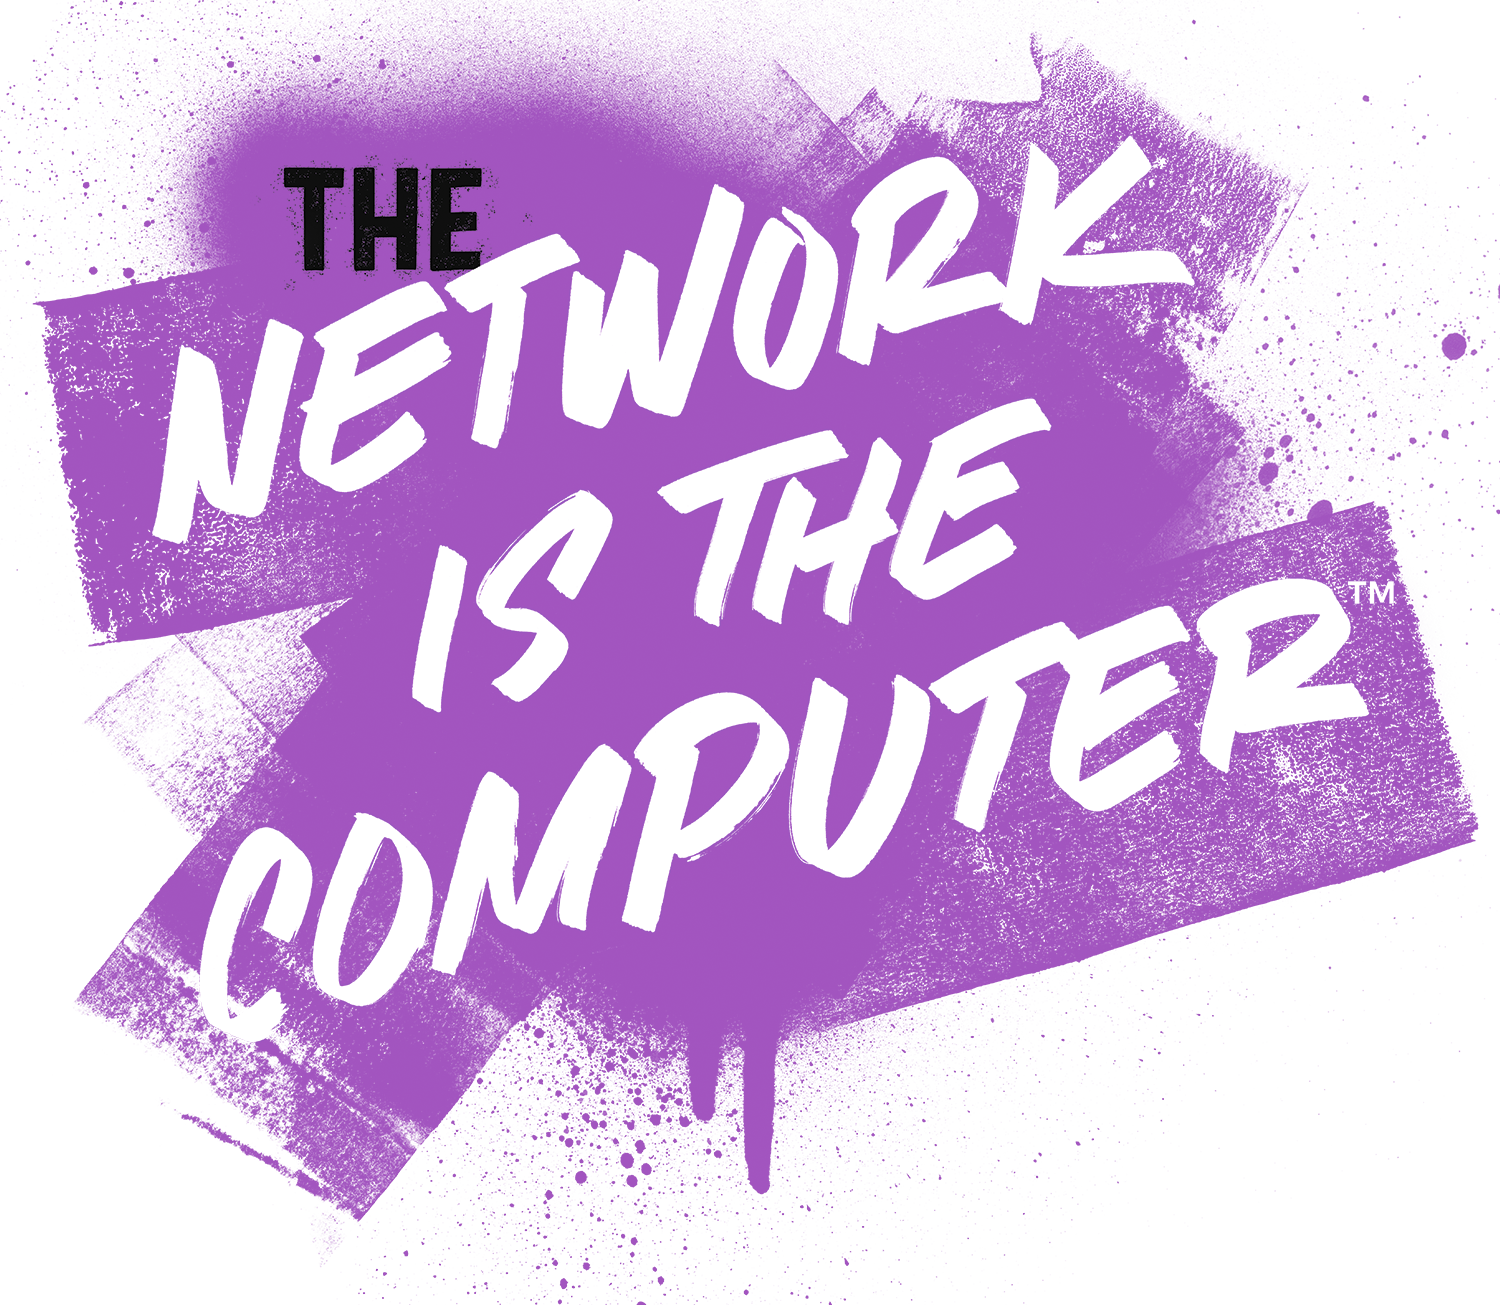 The Network is the Computer: A Conversation with Greg Papadopoulos